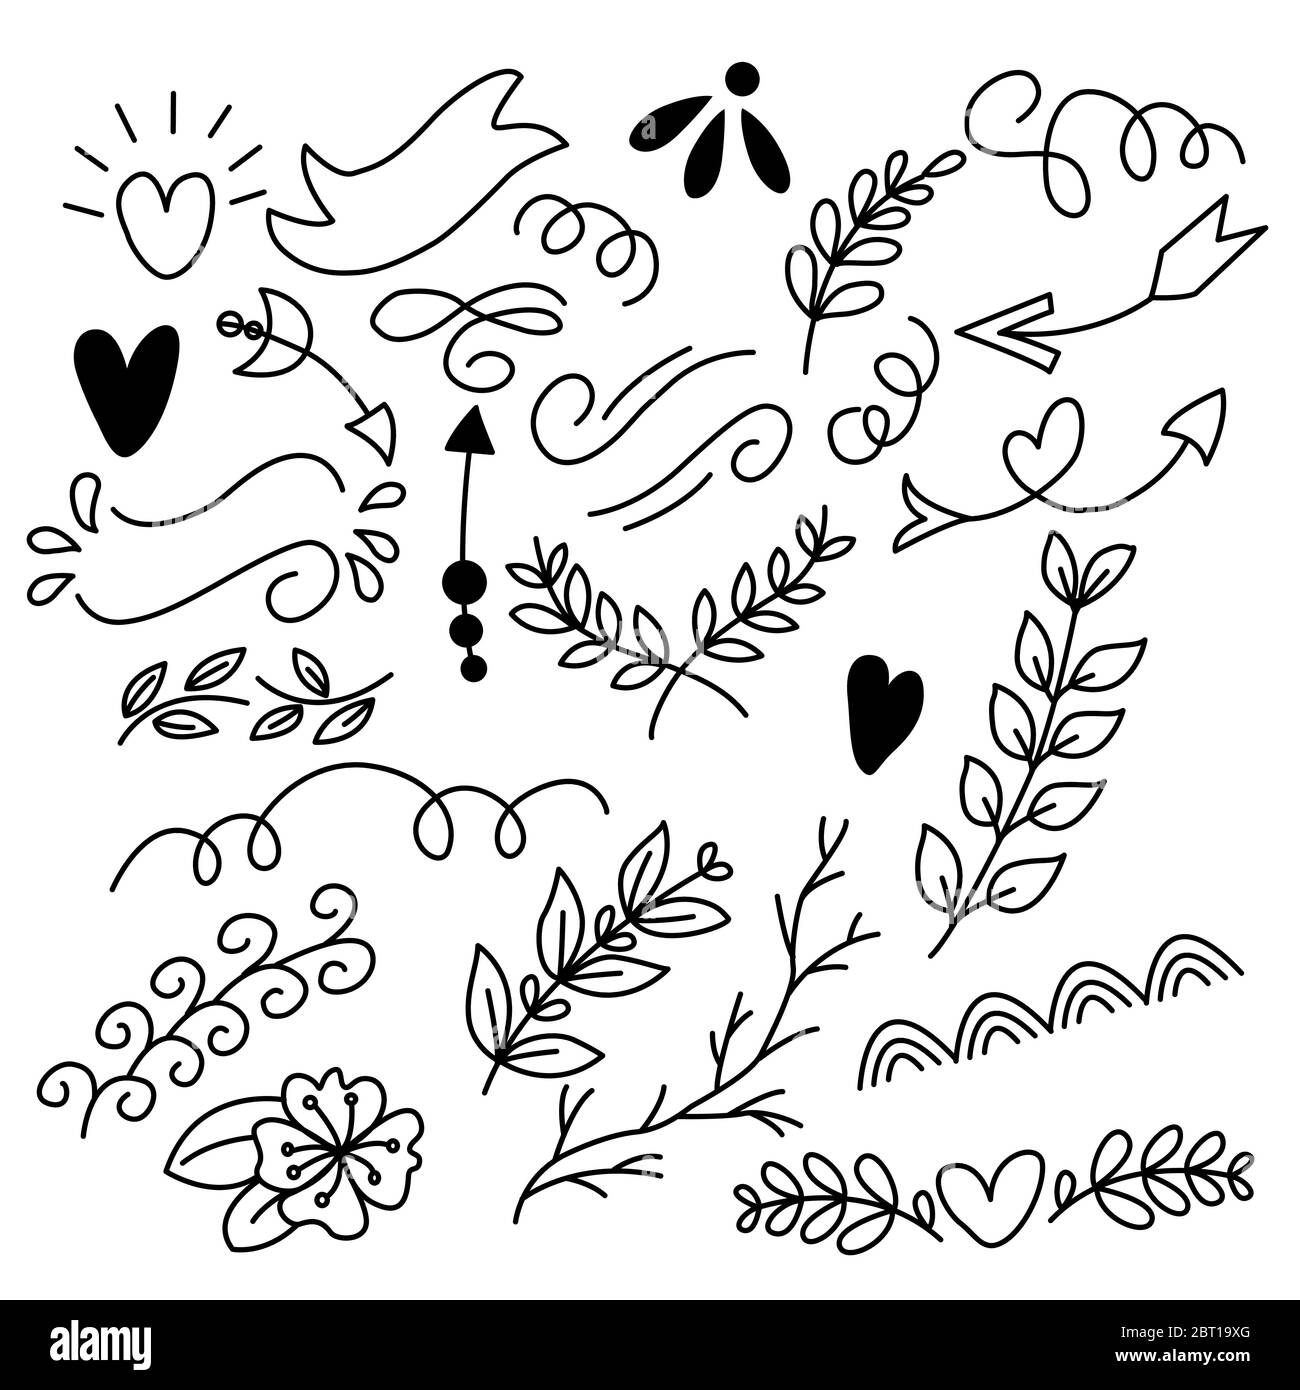 Set of small decorative elements arrows, ribbons, twigs, leaflets, strokes. For the design of diaries, cards, notebook covers, frames Stock Vector